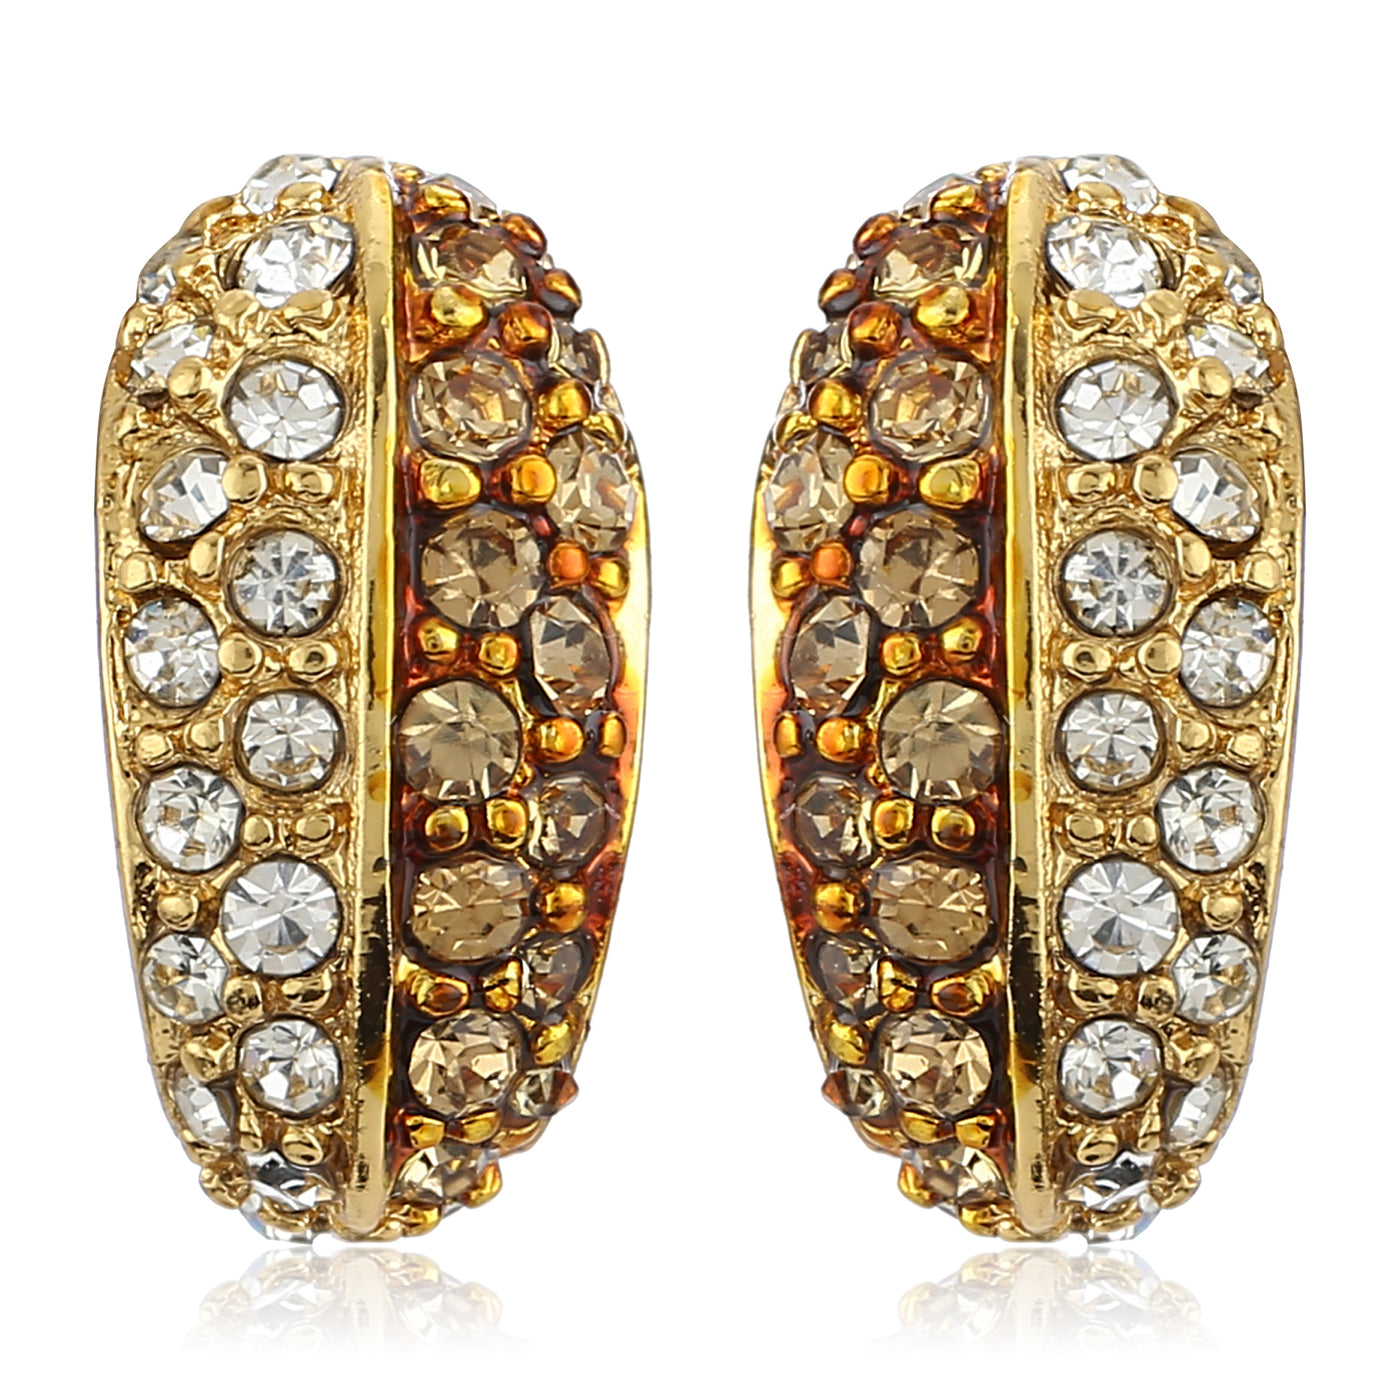 Gold Plated White Austrian Crystal Stone Stud Earrings